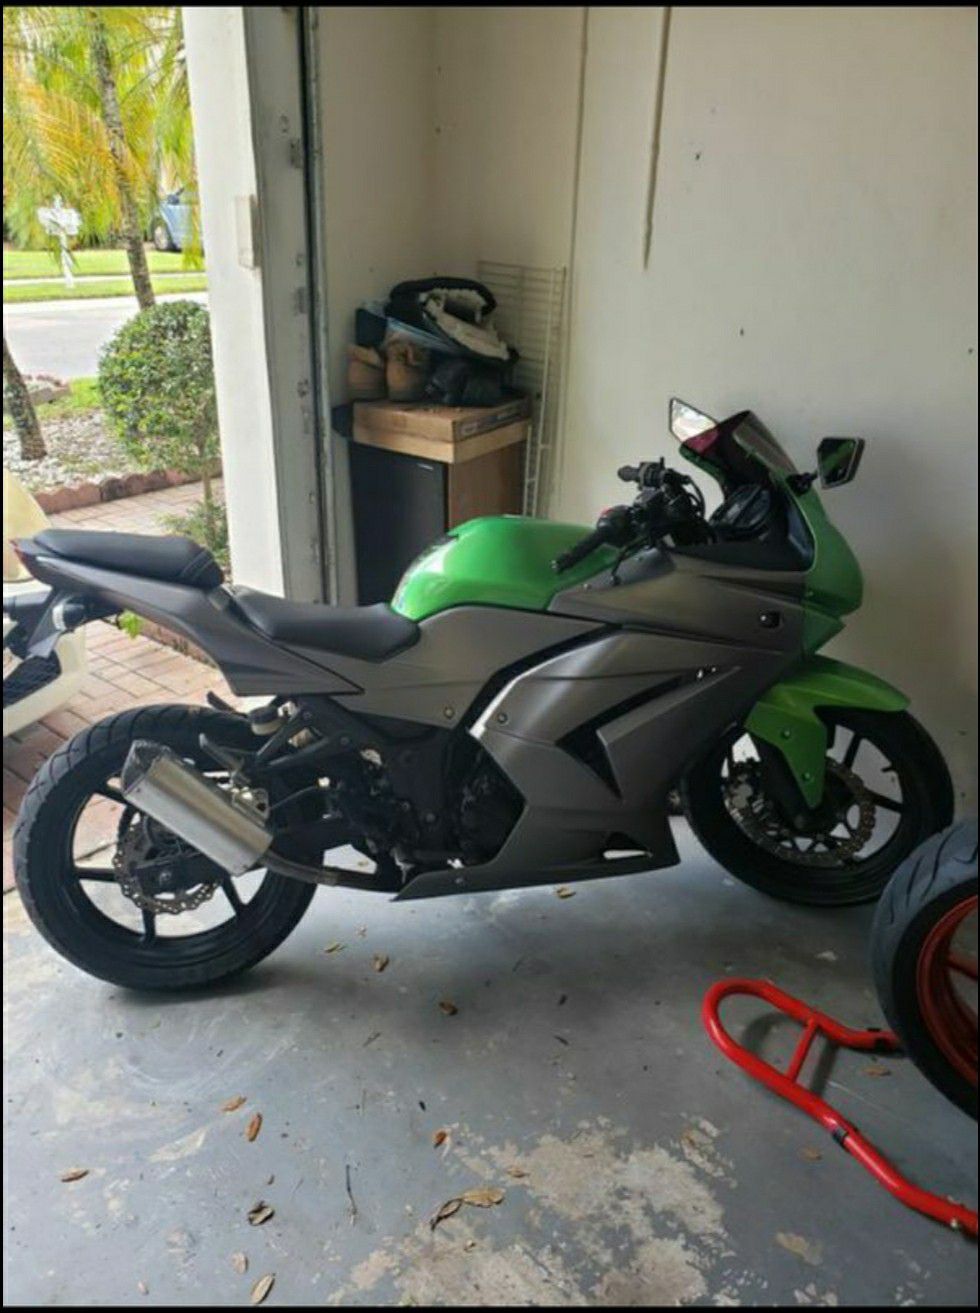 Motorcycle Trade for PICKUP truck or WORK van or SUV Kawasaki ninja 250 perfect condition all service records everything new